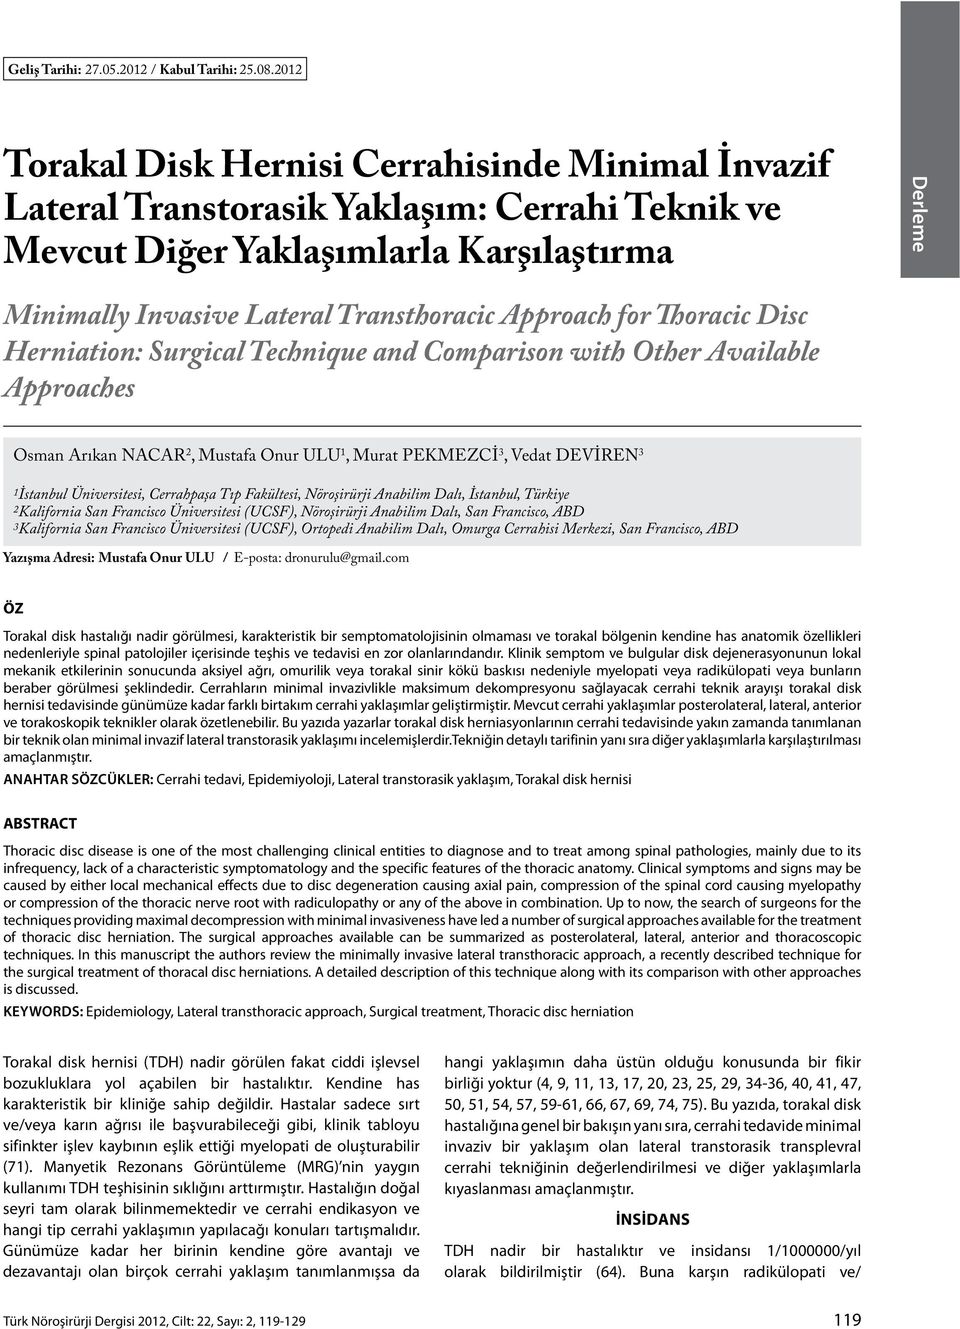 Approach for Thoracic Disc Herniation: Surgical Technique and Comparison with Other Available Approaches Osman Arıkan Nacar 2, Mustafa Onur Ulu 1, Murat Pekmezci 3, Vedat Deviren 3 1İstanbul